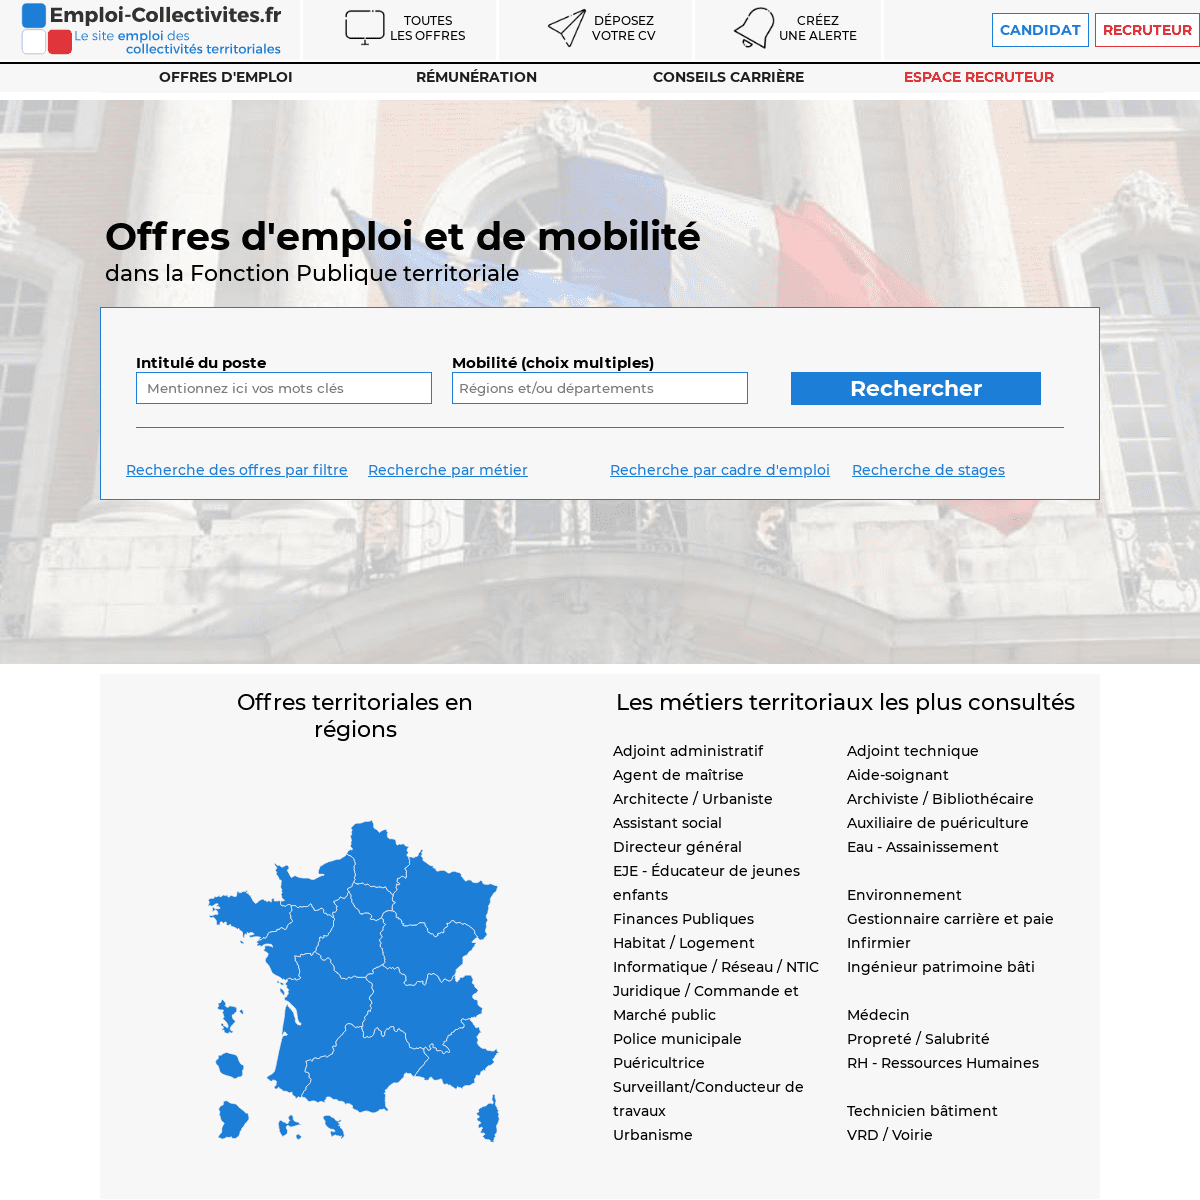 A complete backup of https://emploi-collectivites.fr